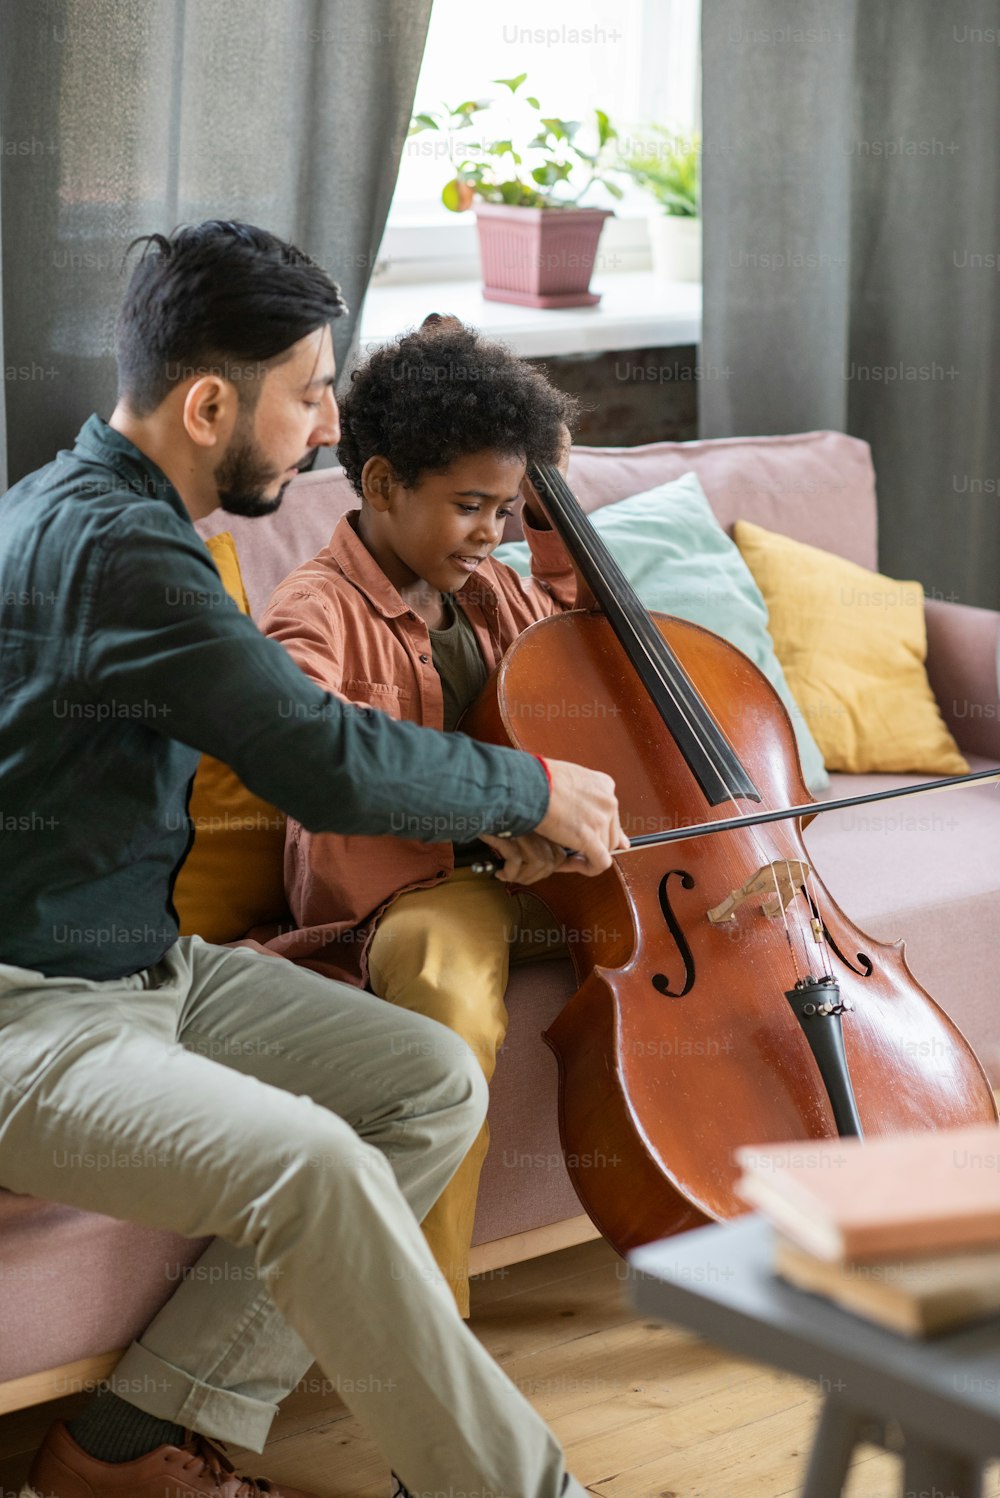 Young music teacher helping cute schoolboy playing cello while both sitting on couch in home environment